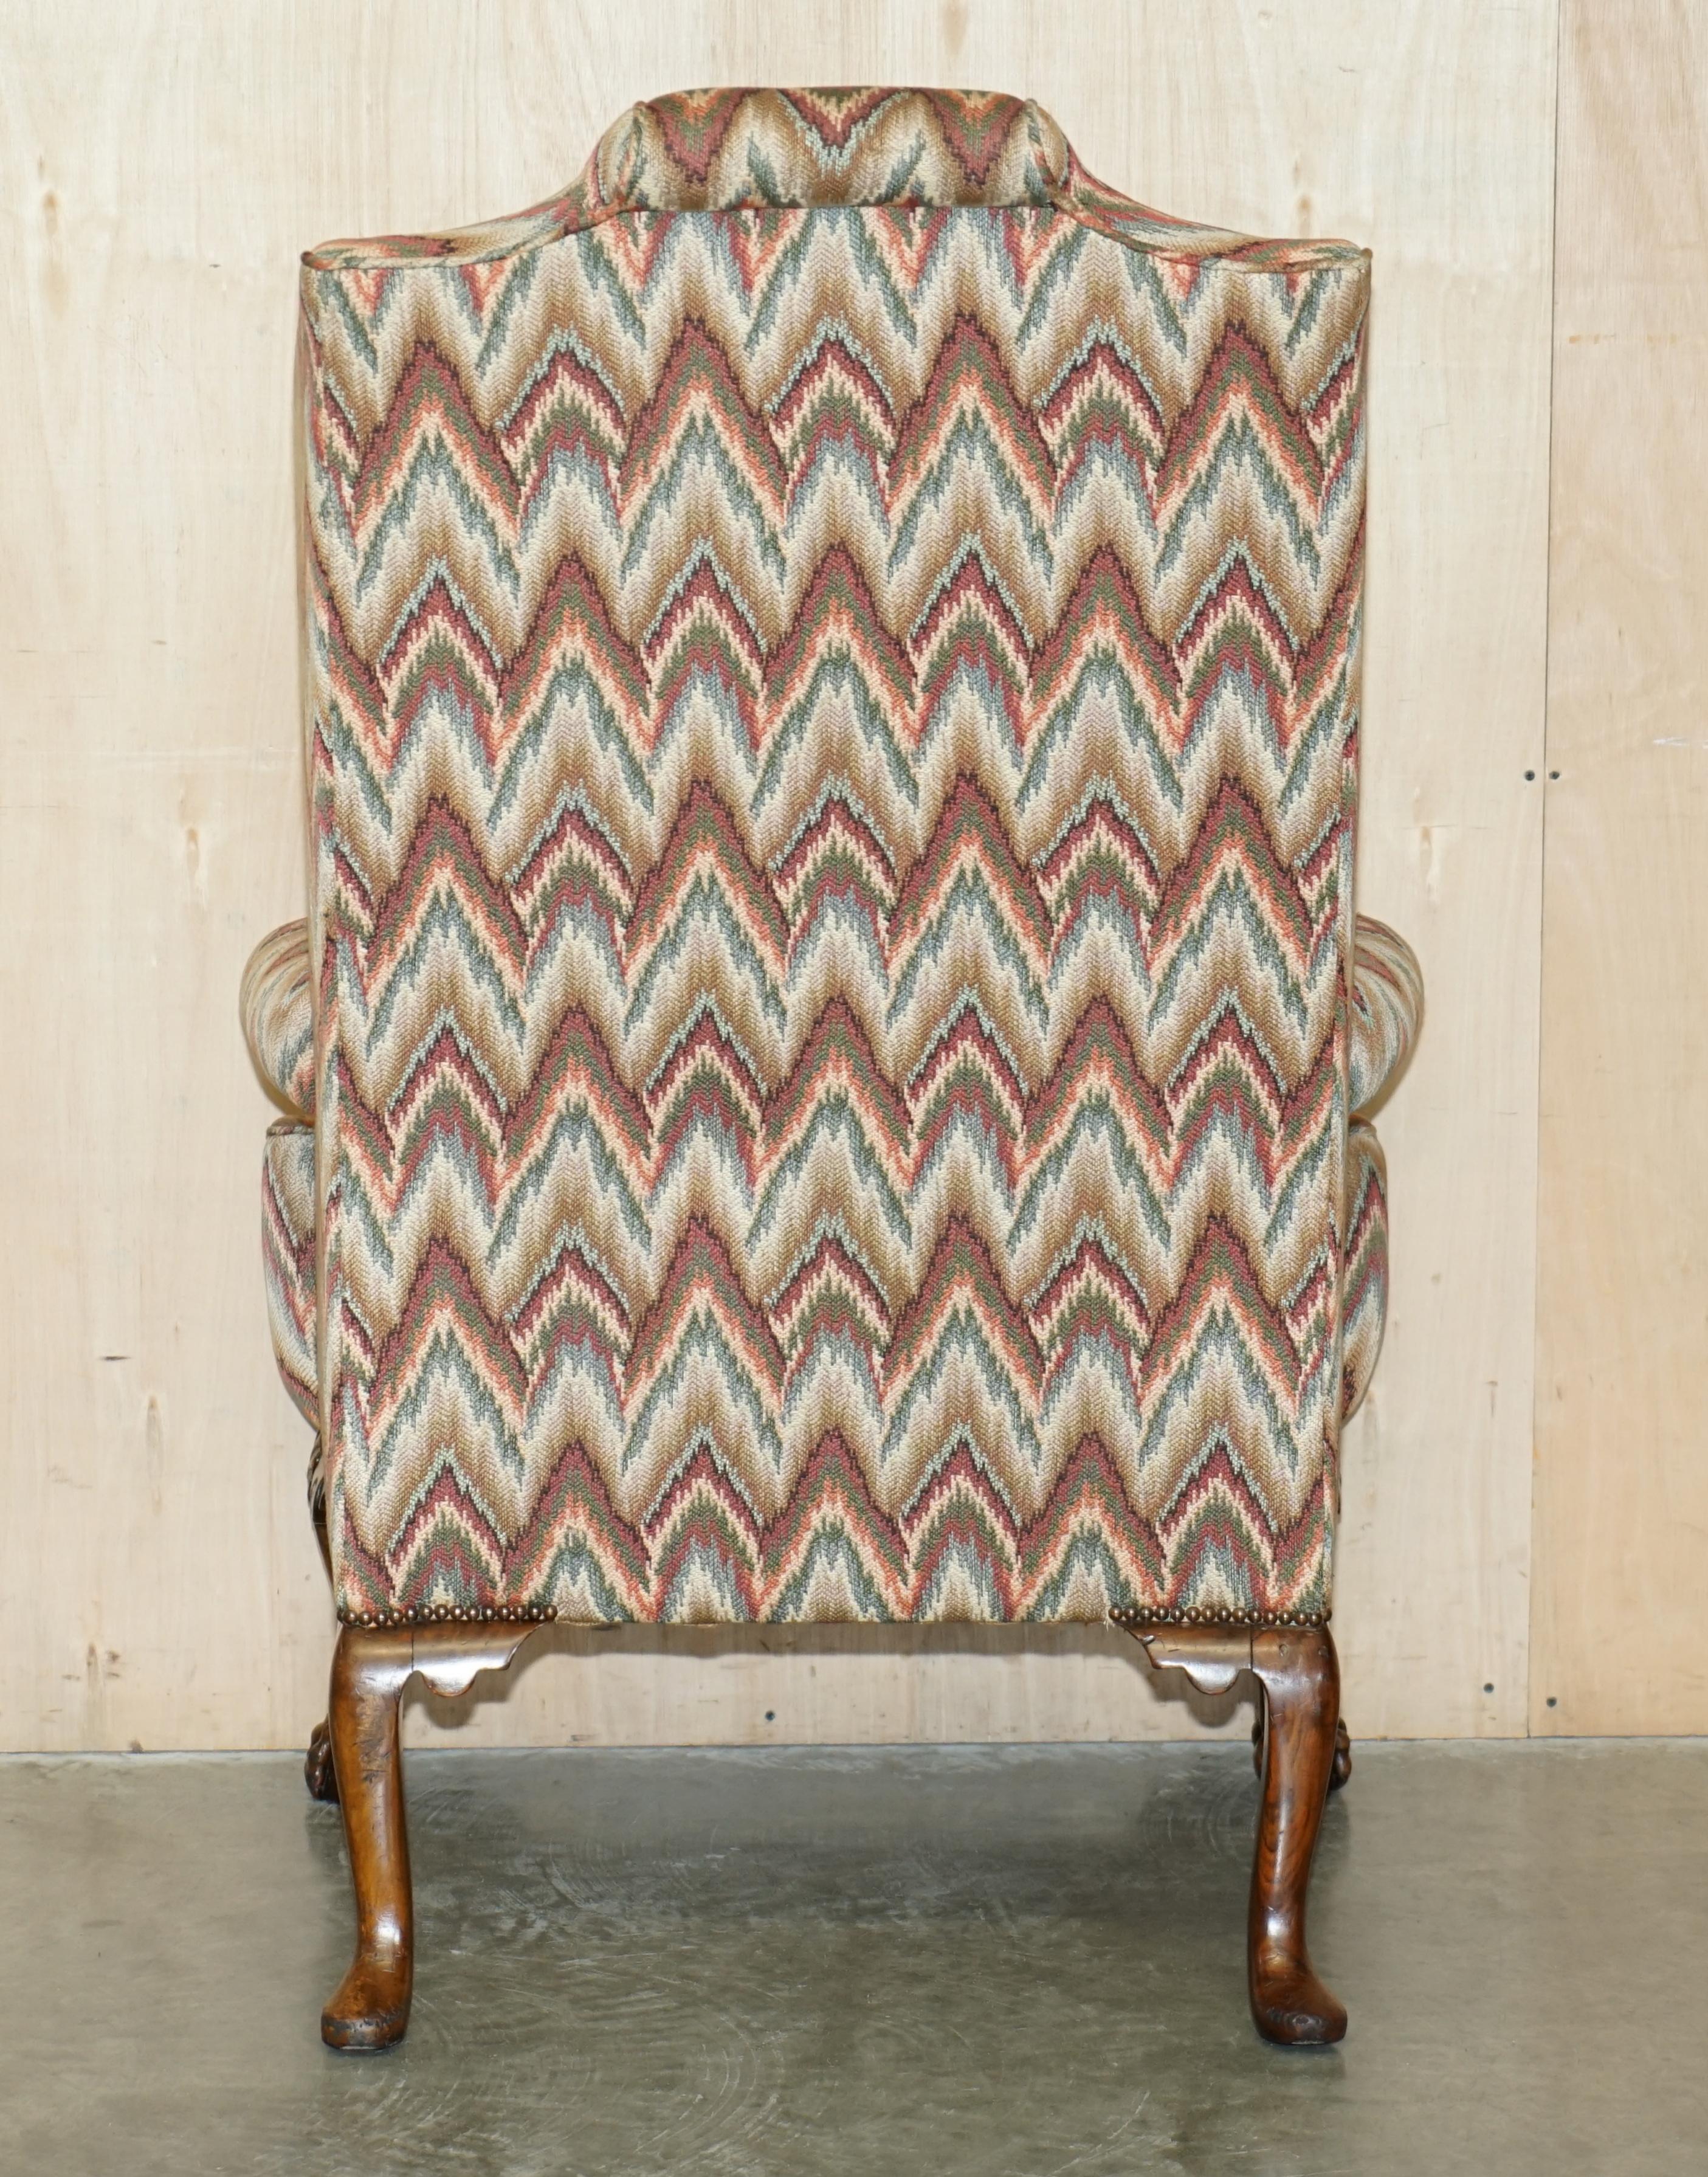 PAIR OF ANTIQUE KILIM FABRIC WiNGBACK ARMCHAIRS ORNATELY CARVED CLAW & BALL FEET For Sale 9